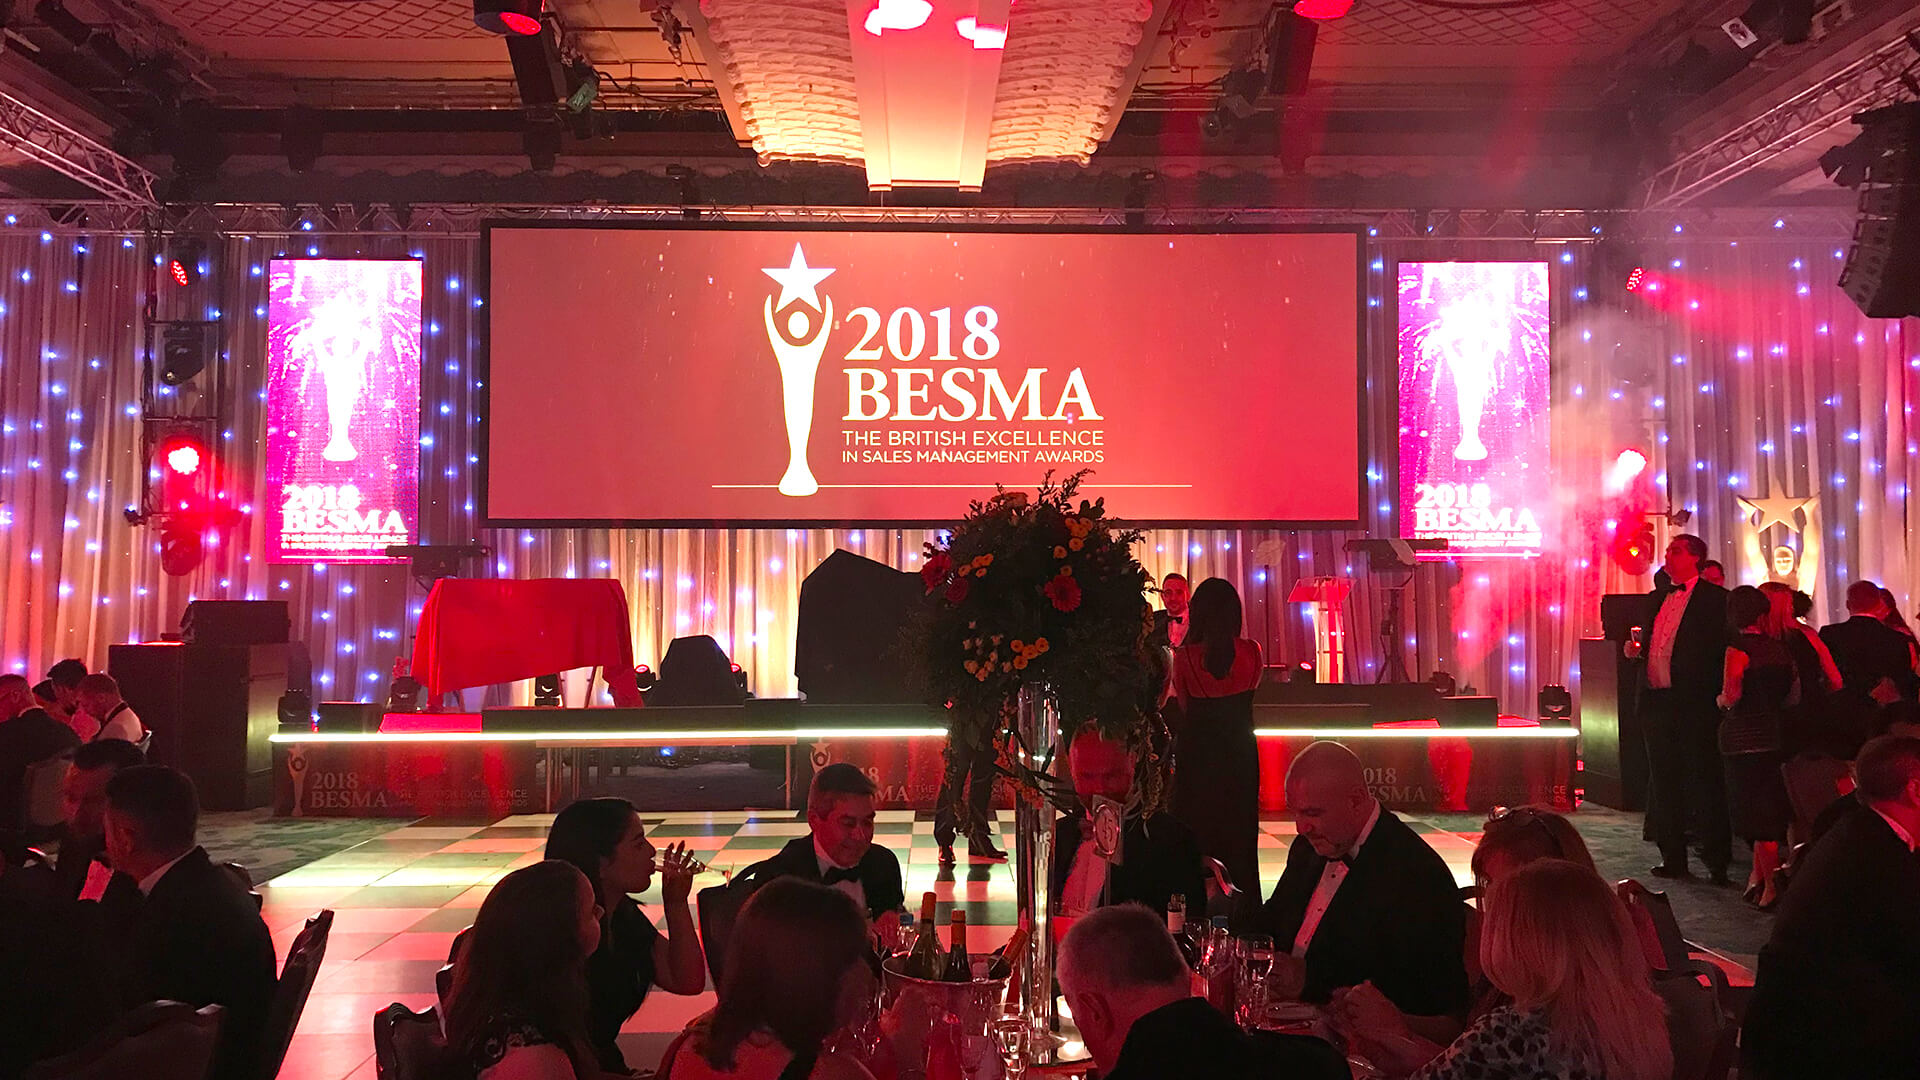 AI Global Media Attends the BESMA 2018 Awards